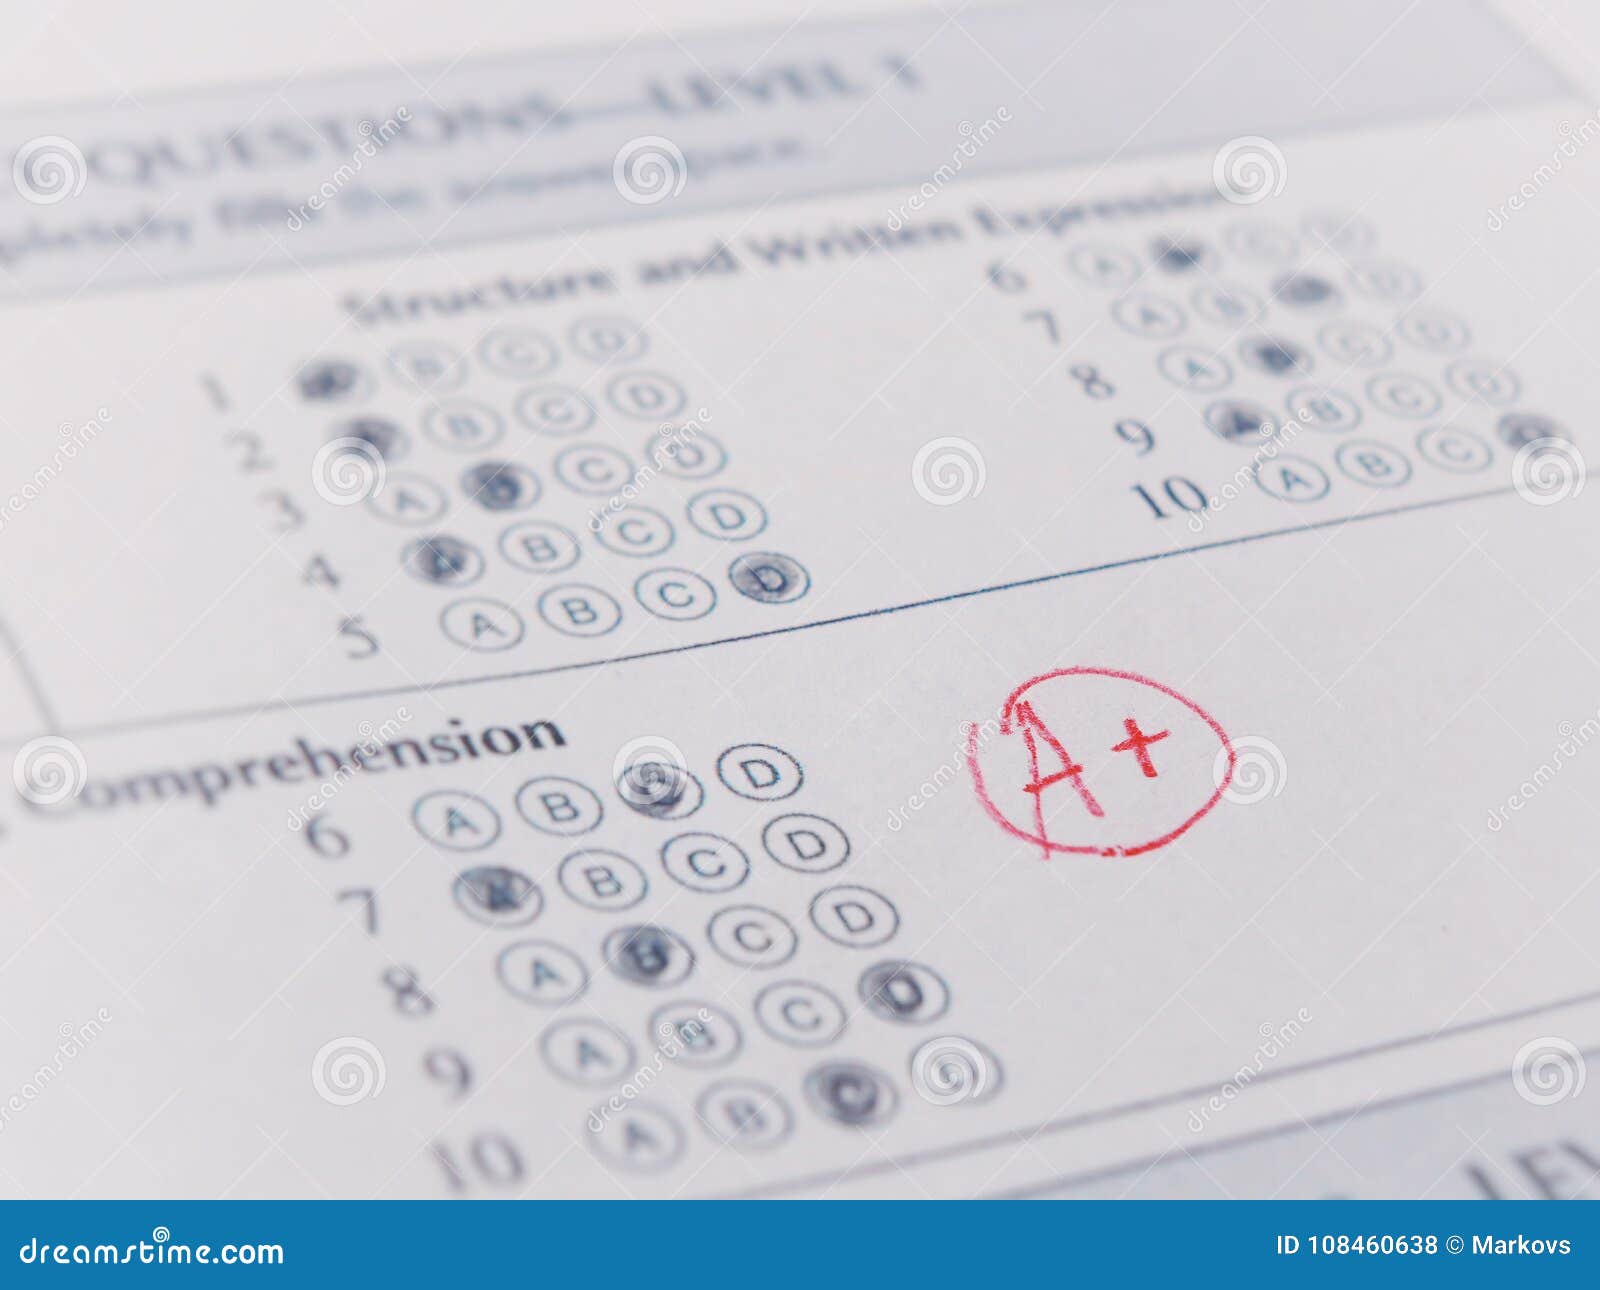 close-up photograph of a perfect grade on a scantron test